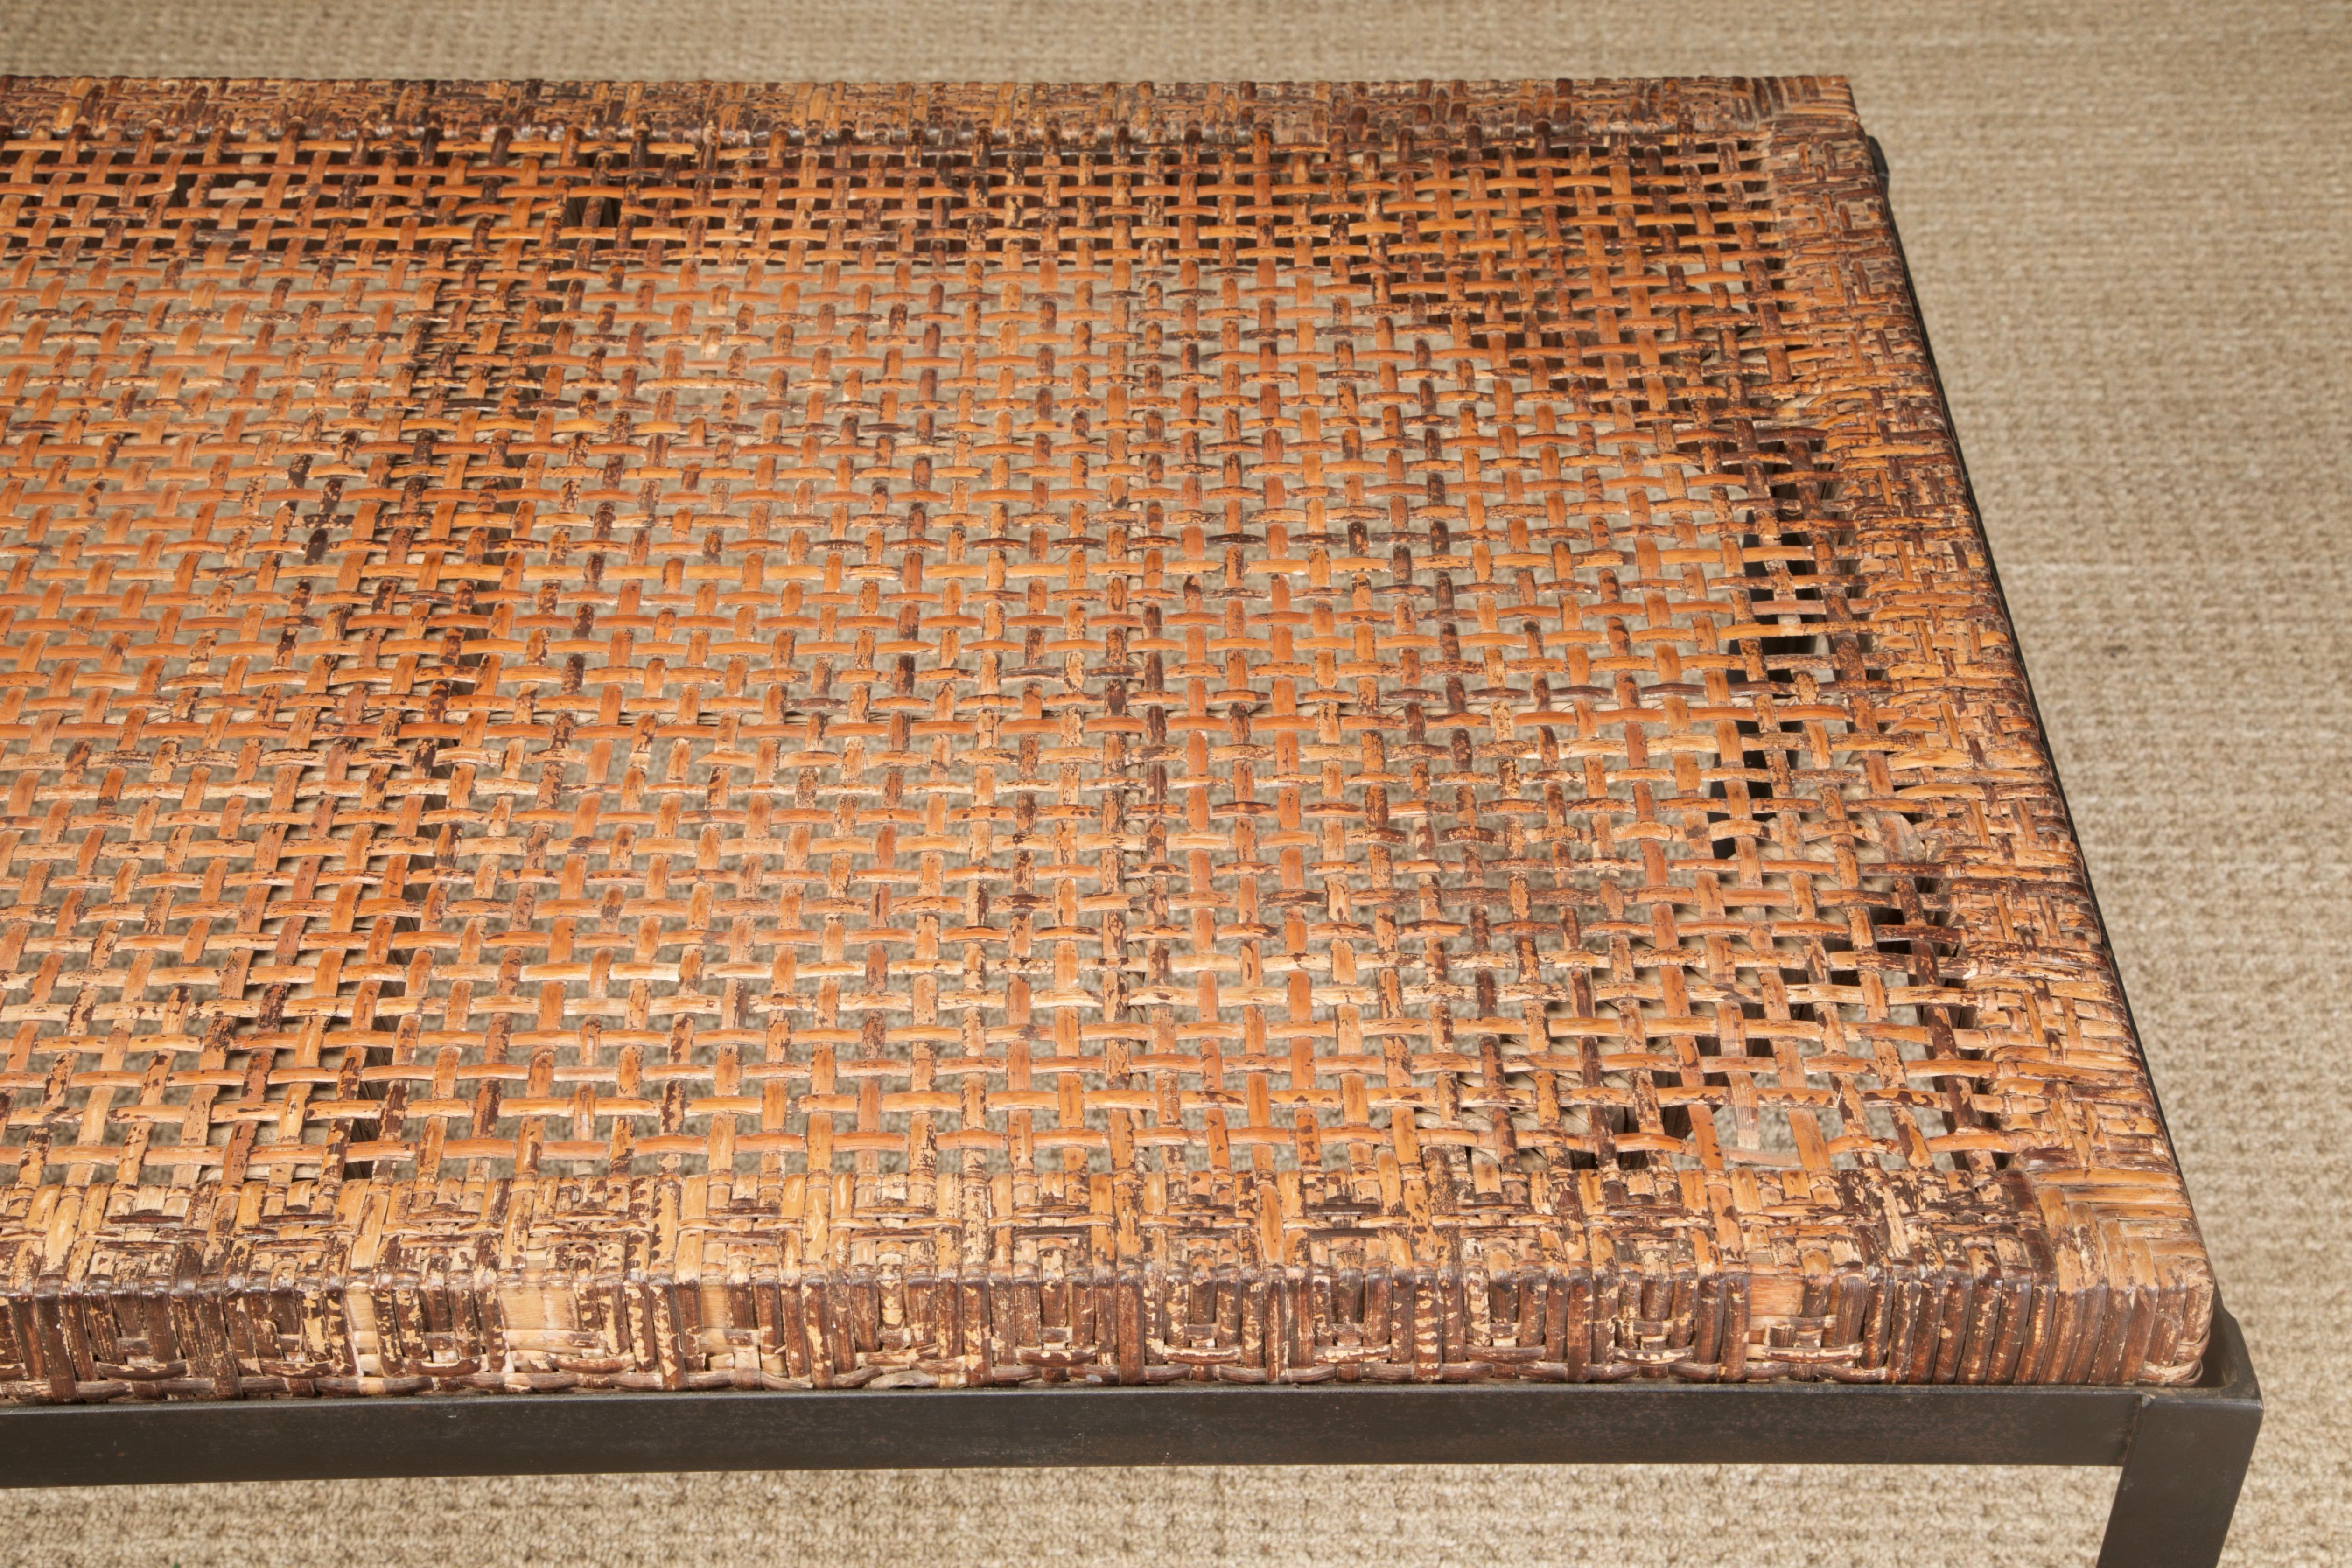 Caned Dining Table by Danny Ho Fong for Tropi-cal in Iron and Rattan, c 1960s For Sale 8